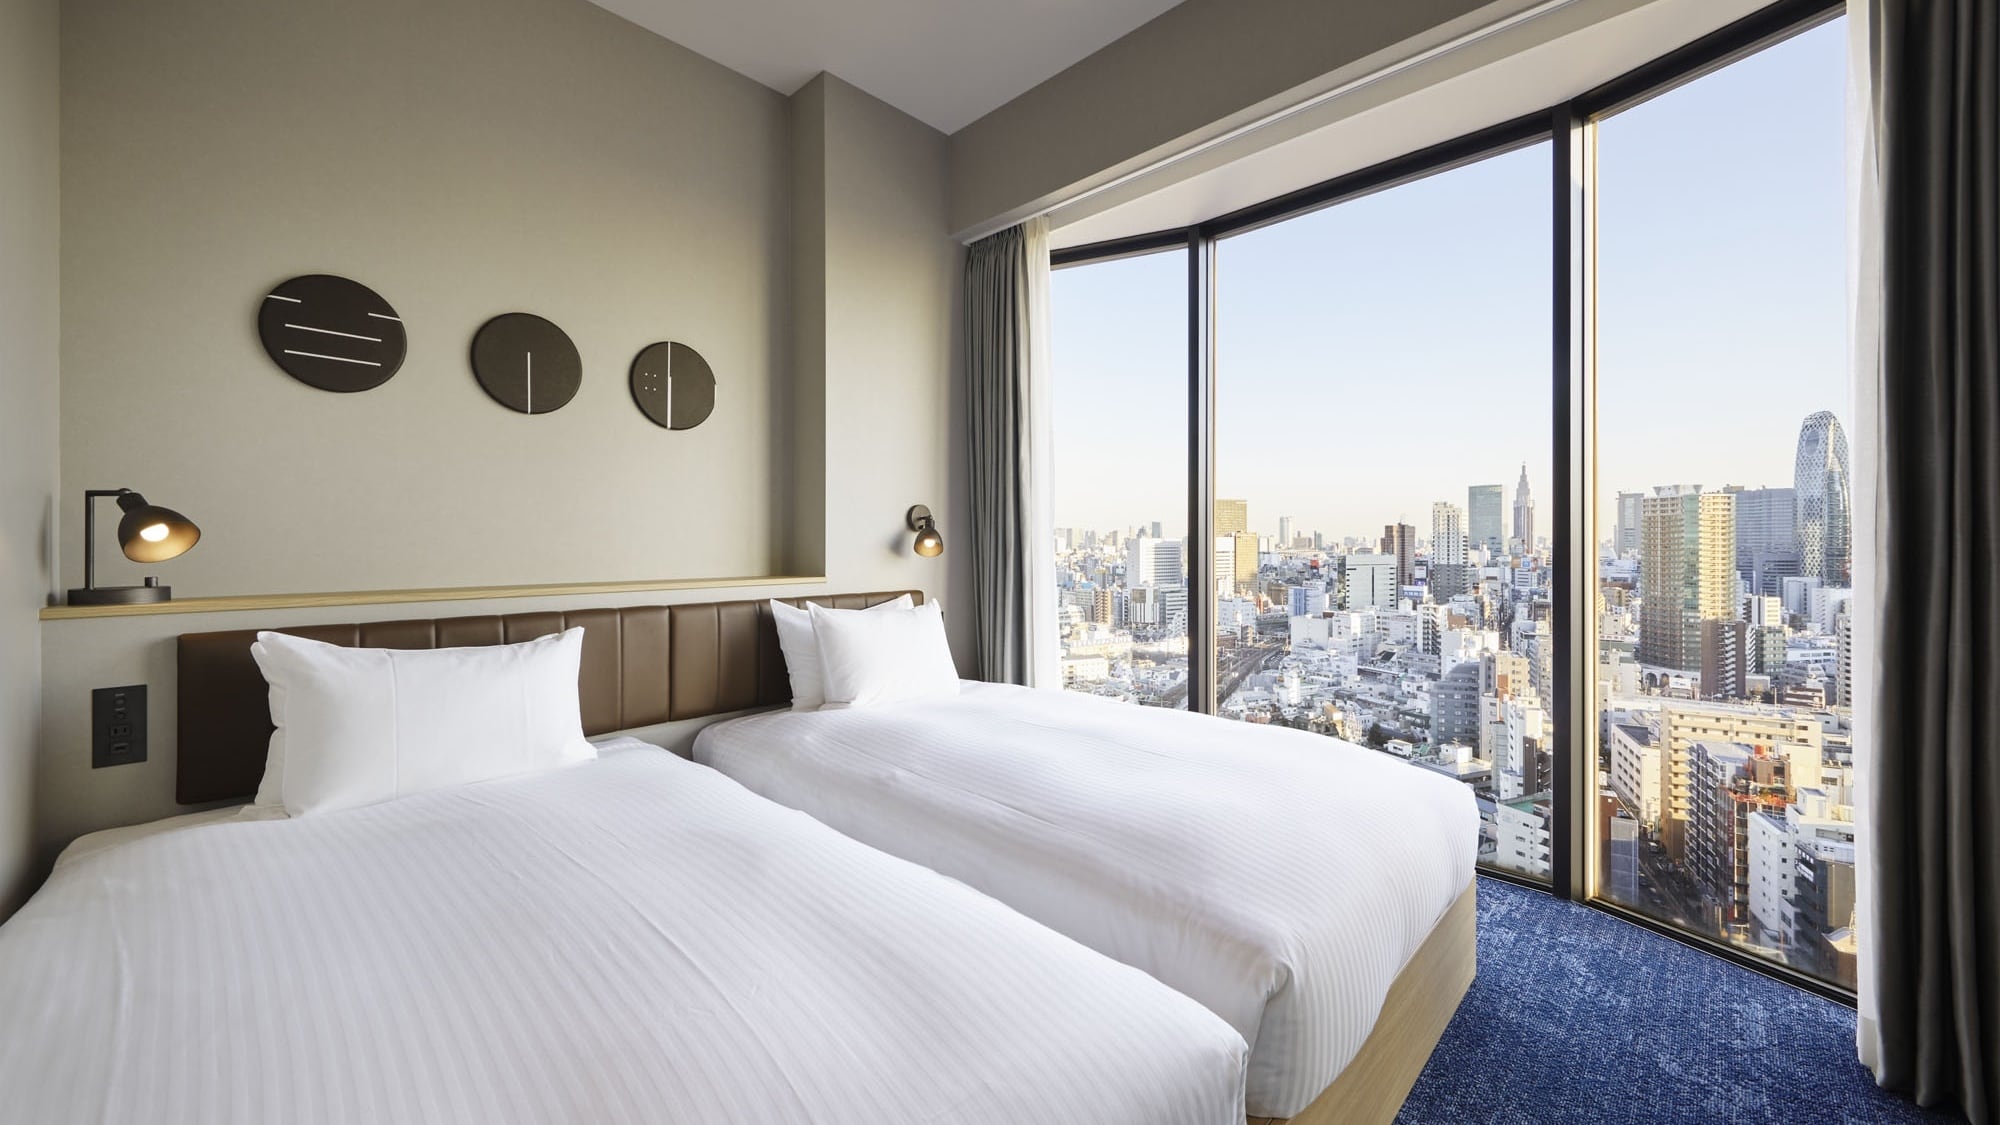 ◆Mercury Suite｜From the rooms located on the upper floors, you can enjoy the magnificent view of the big city in front of you.